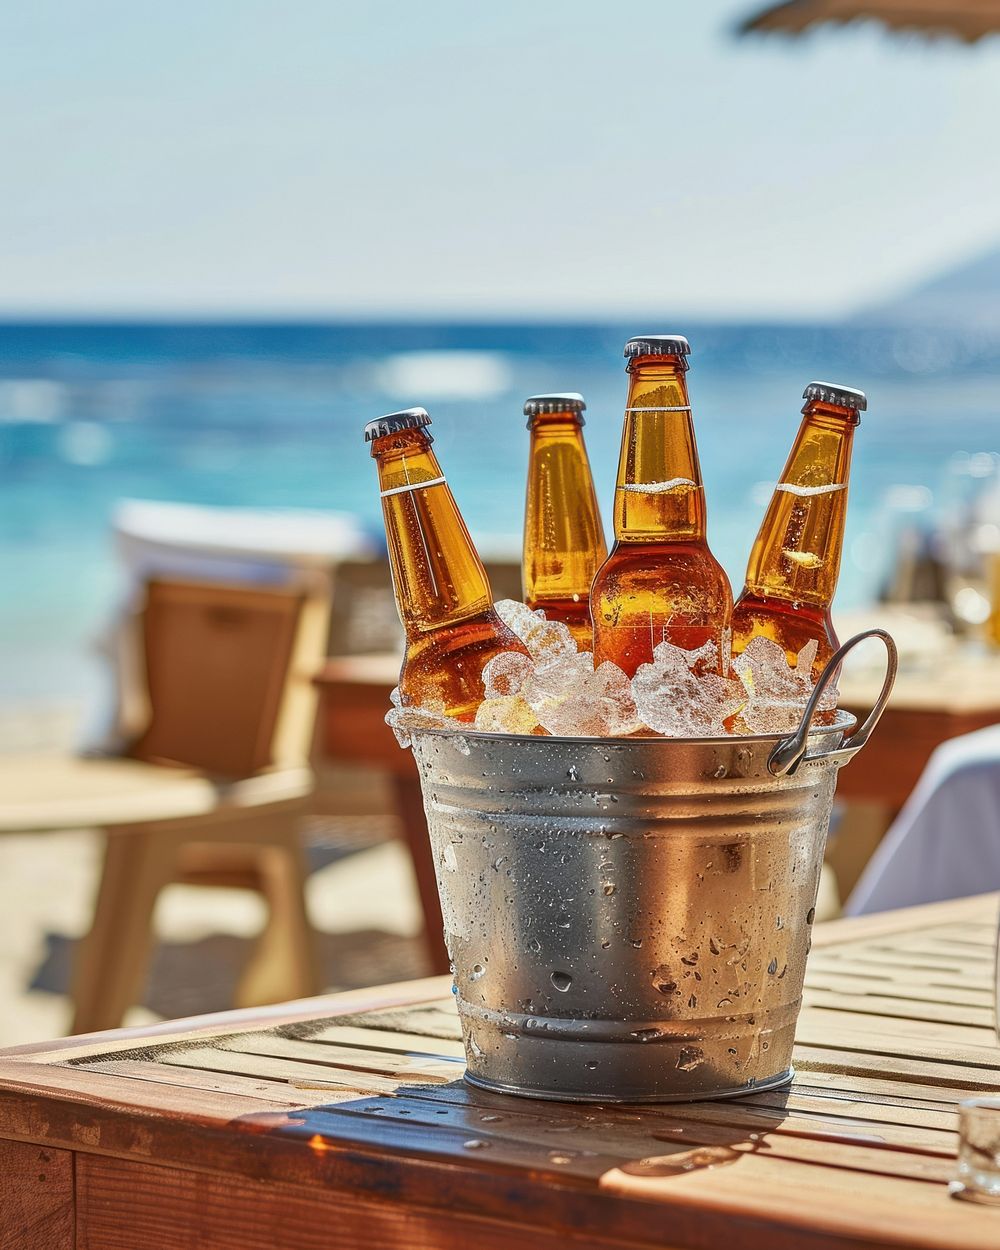 Assorted beer bottles in a metal bucket full of ice put on wood table against beach view vacation summer drink.